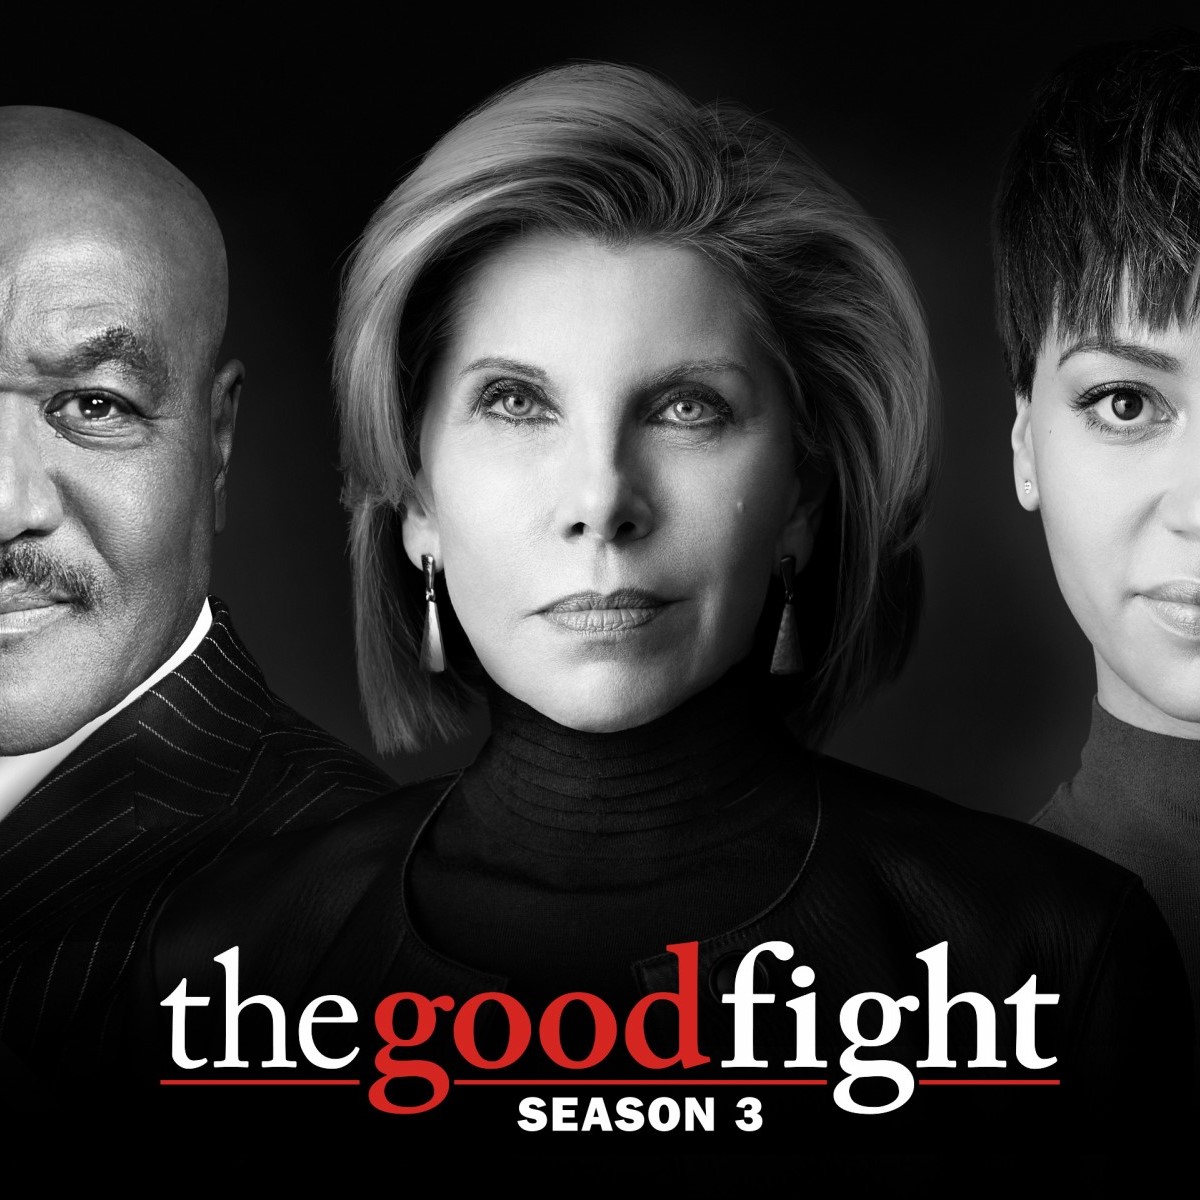 The Good Fight television series